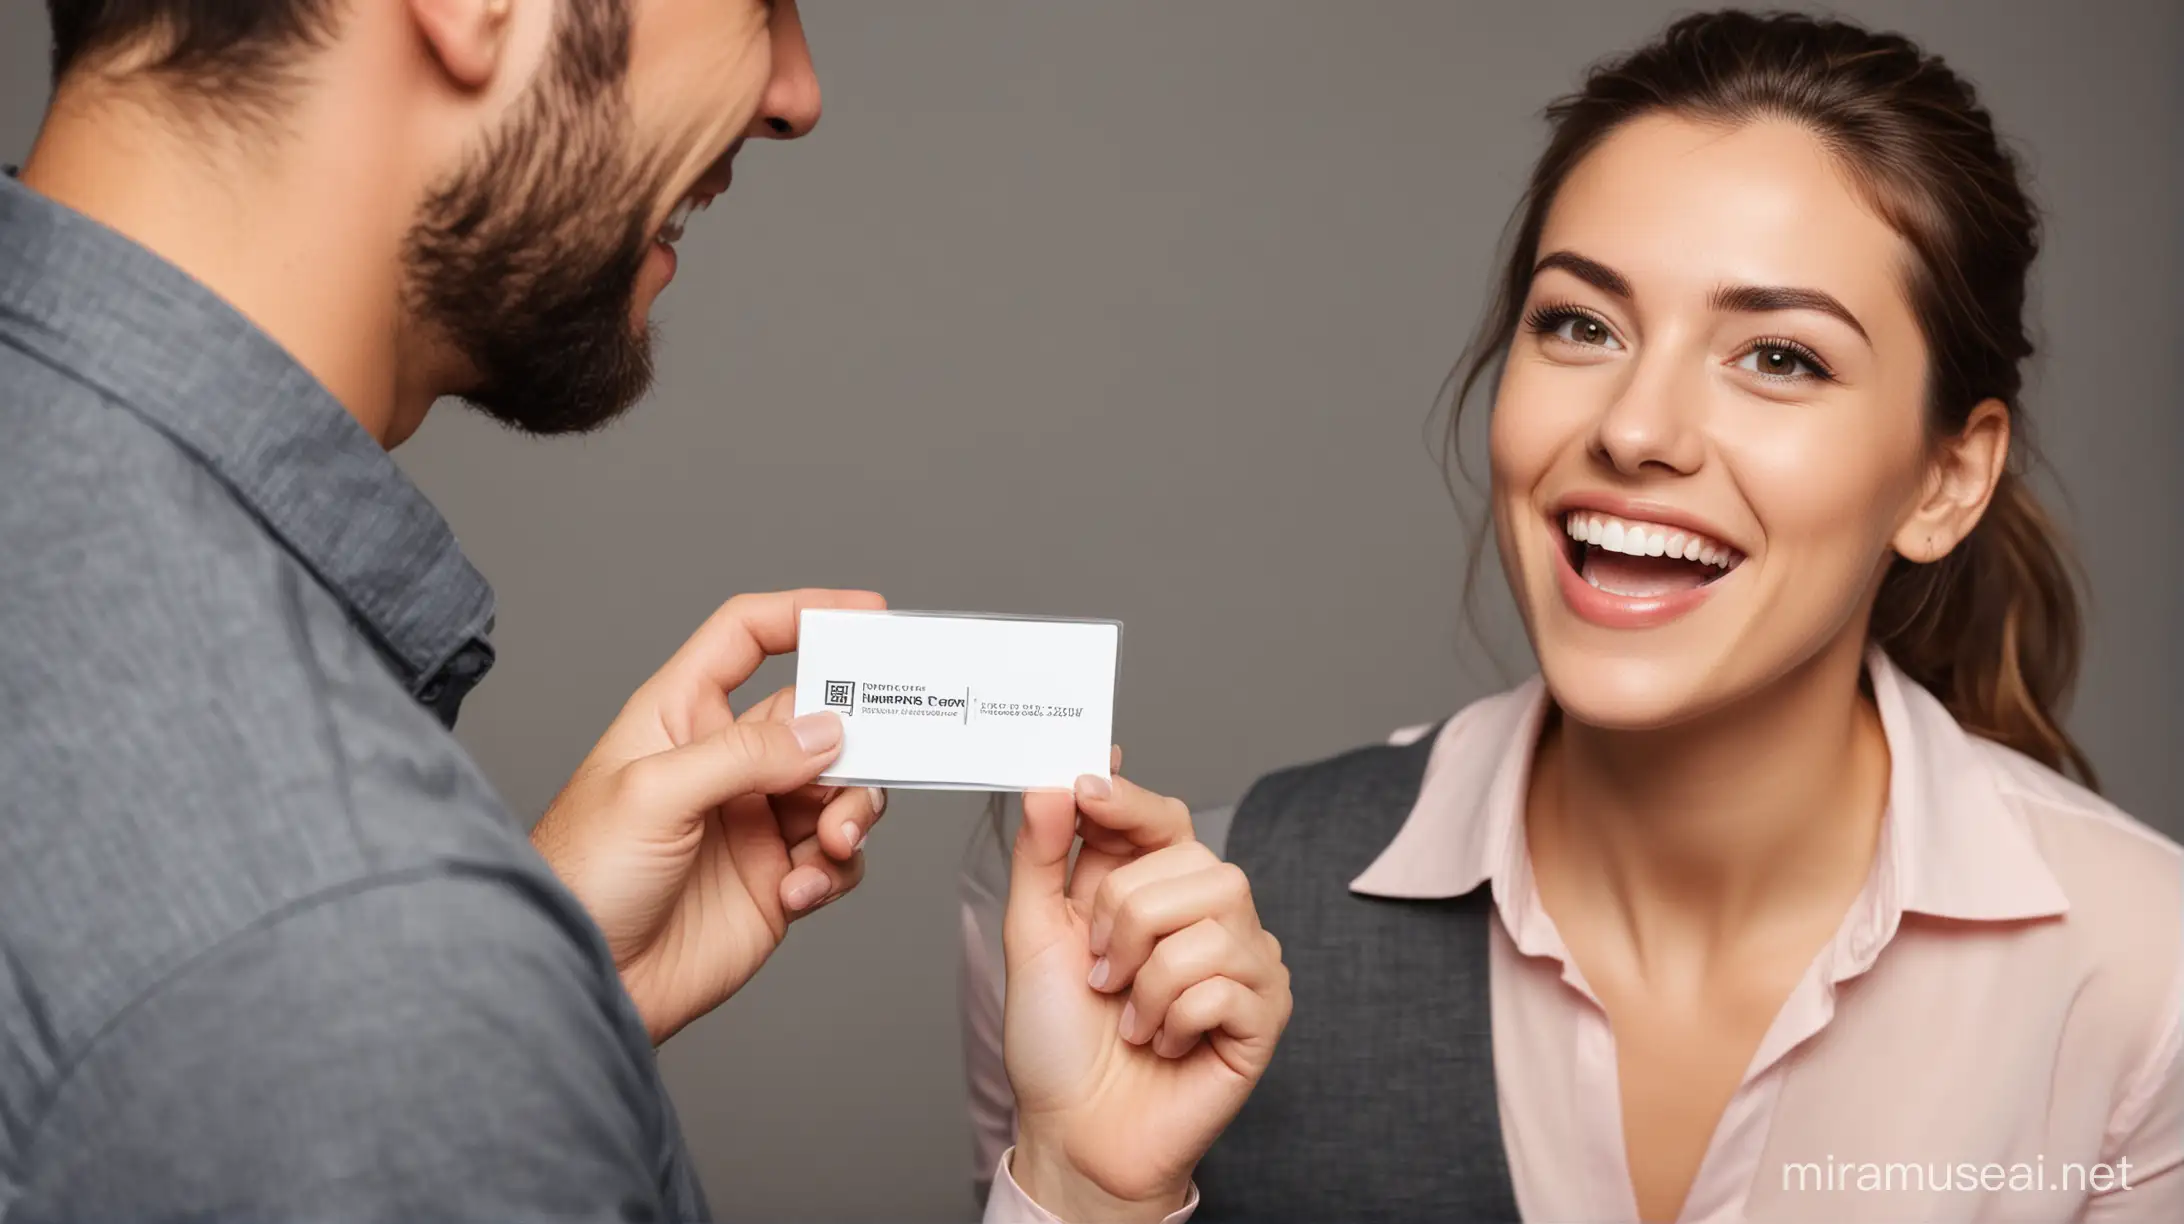 handing someone your business card, they take it in their hand and look at the business card with excitement on their face.